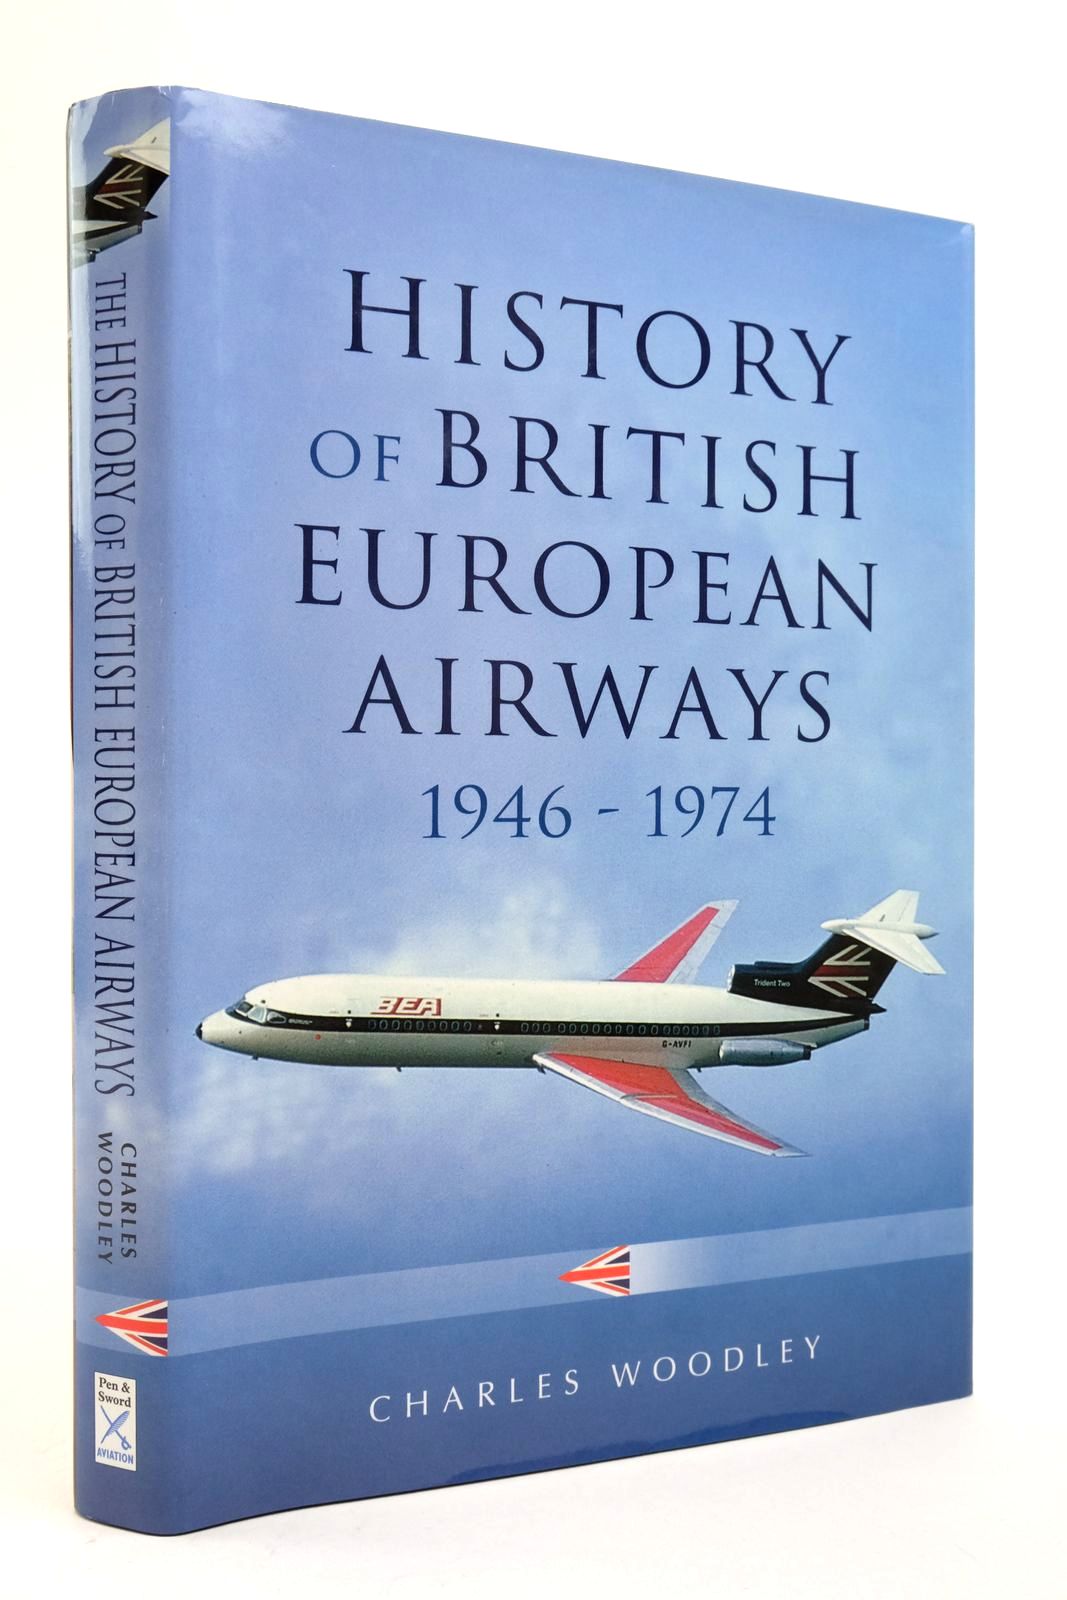 Photo of THE HISTORY OF BRITISH EUROPEAN AIRWAYS 1946 - 1974 written by Woodley, Charles published by Pen & Sword Aviation (STOCK CODE: 2138481)  for sale by Stella & Rose's Books